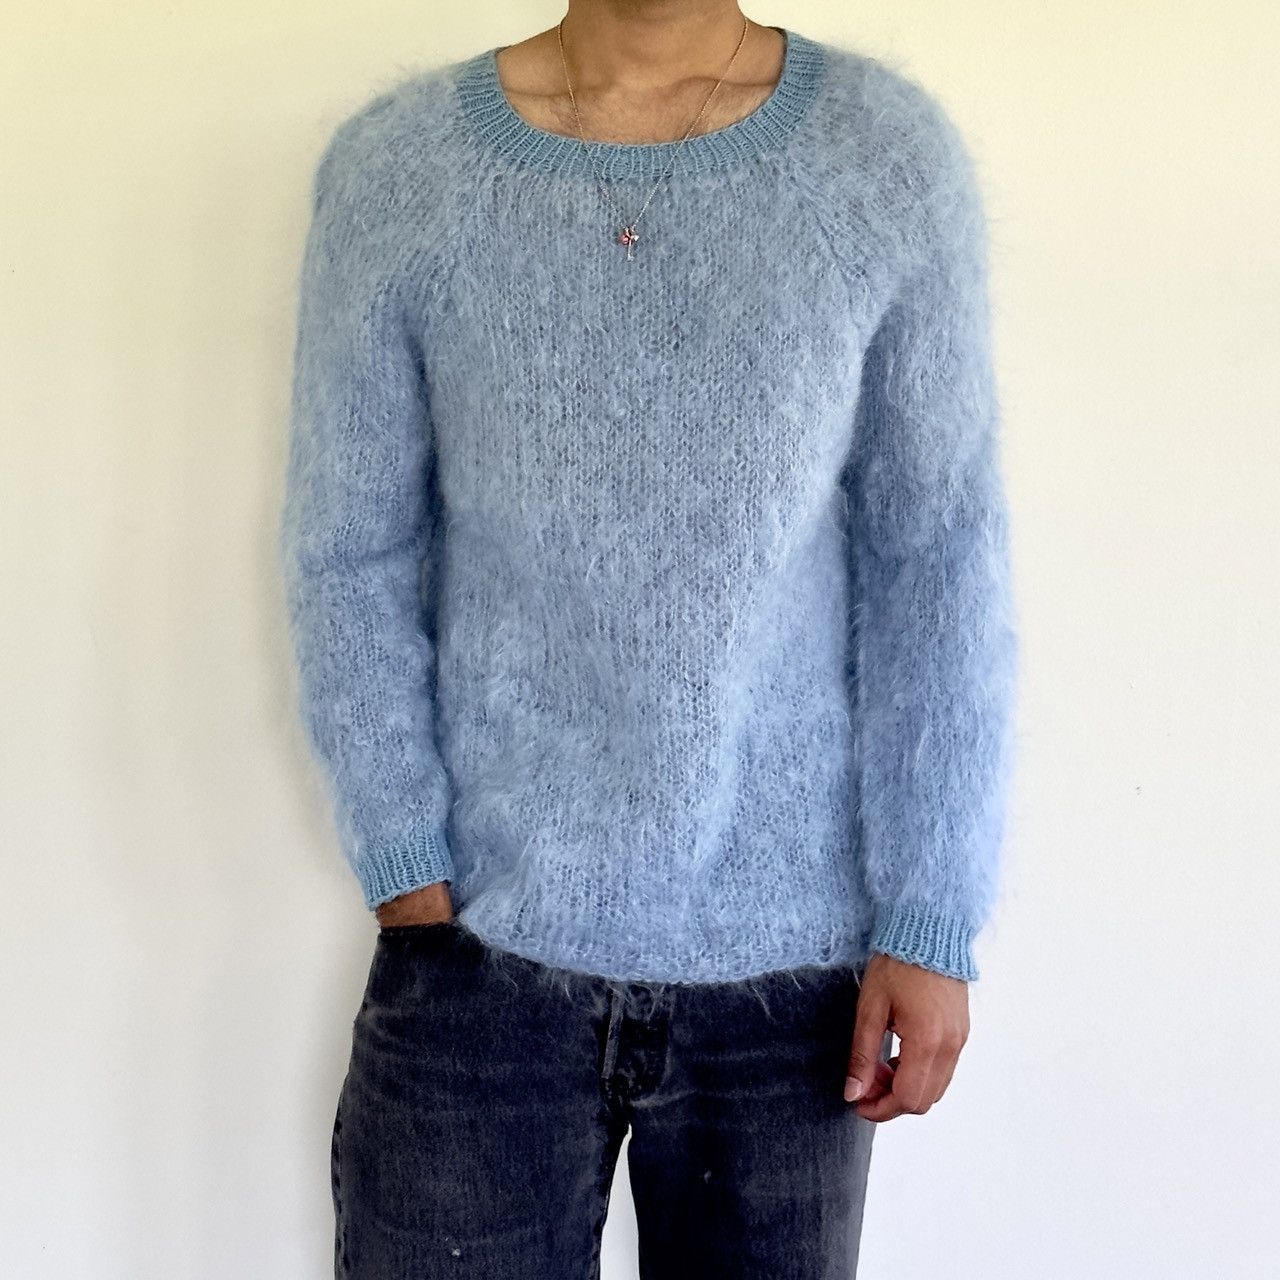 Vintage Vintage 1970s Baby Blue Mohair Sweater | Grailed